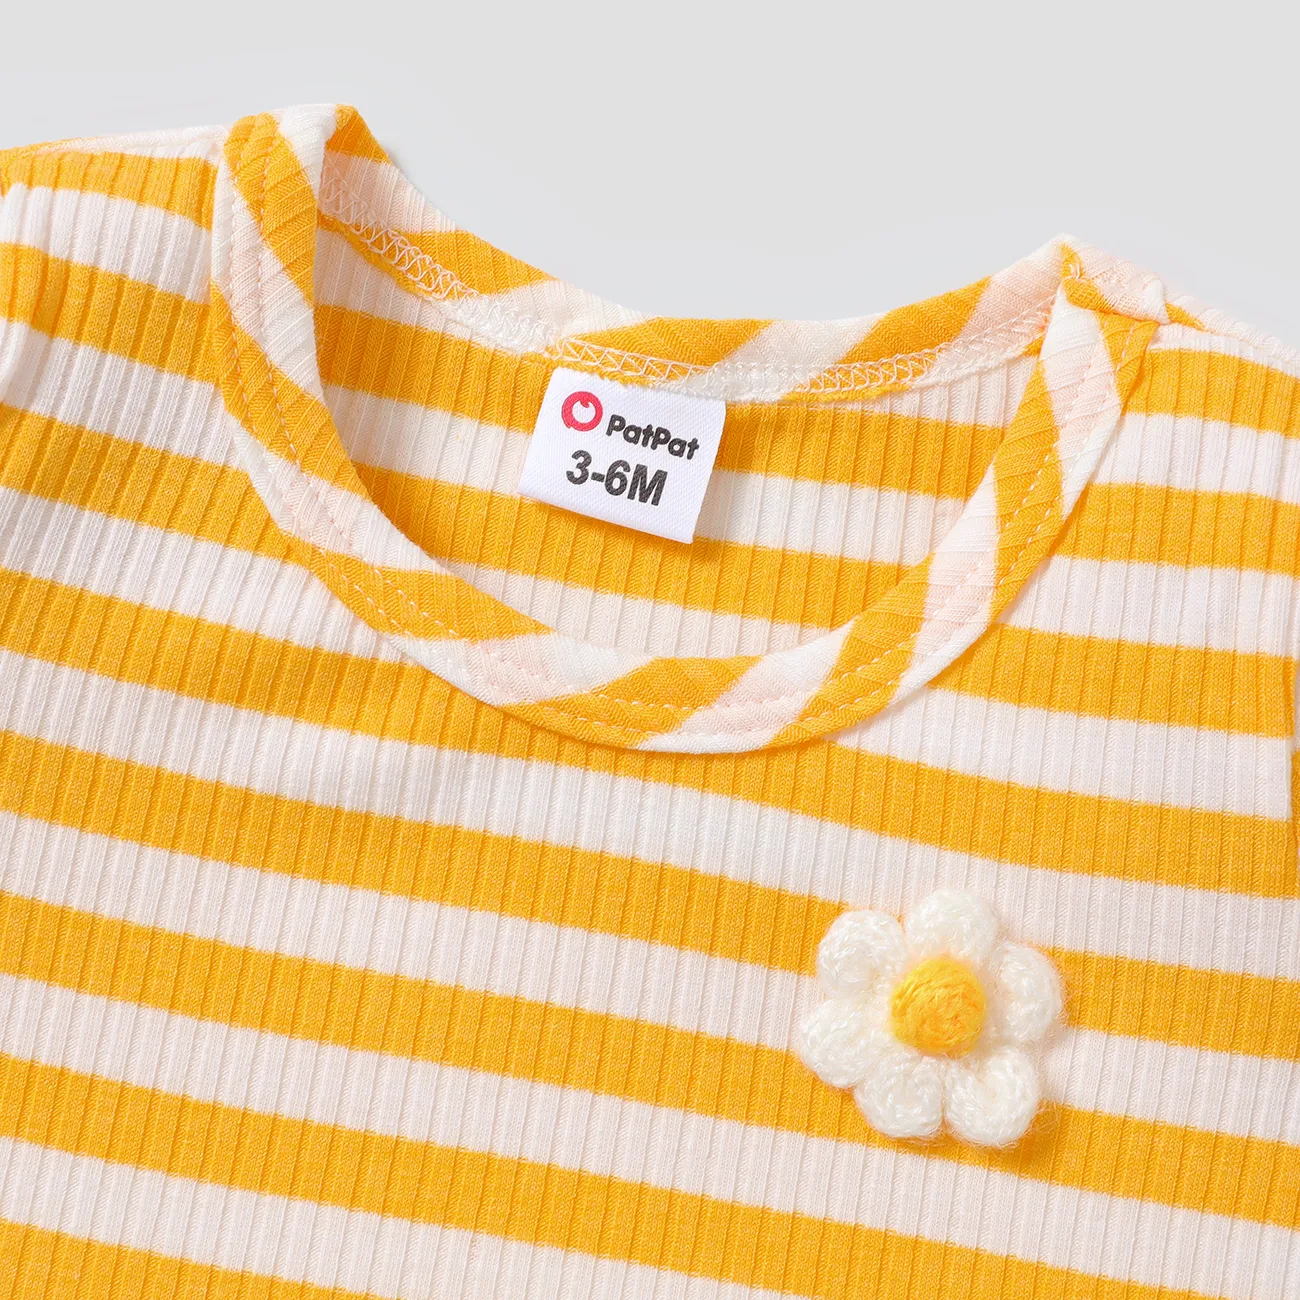 2pcs Baby Girl 3D Flower Design Striped Ribbed Short-sleeve Top and Shorts Set Yellow big image 1